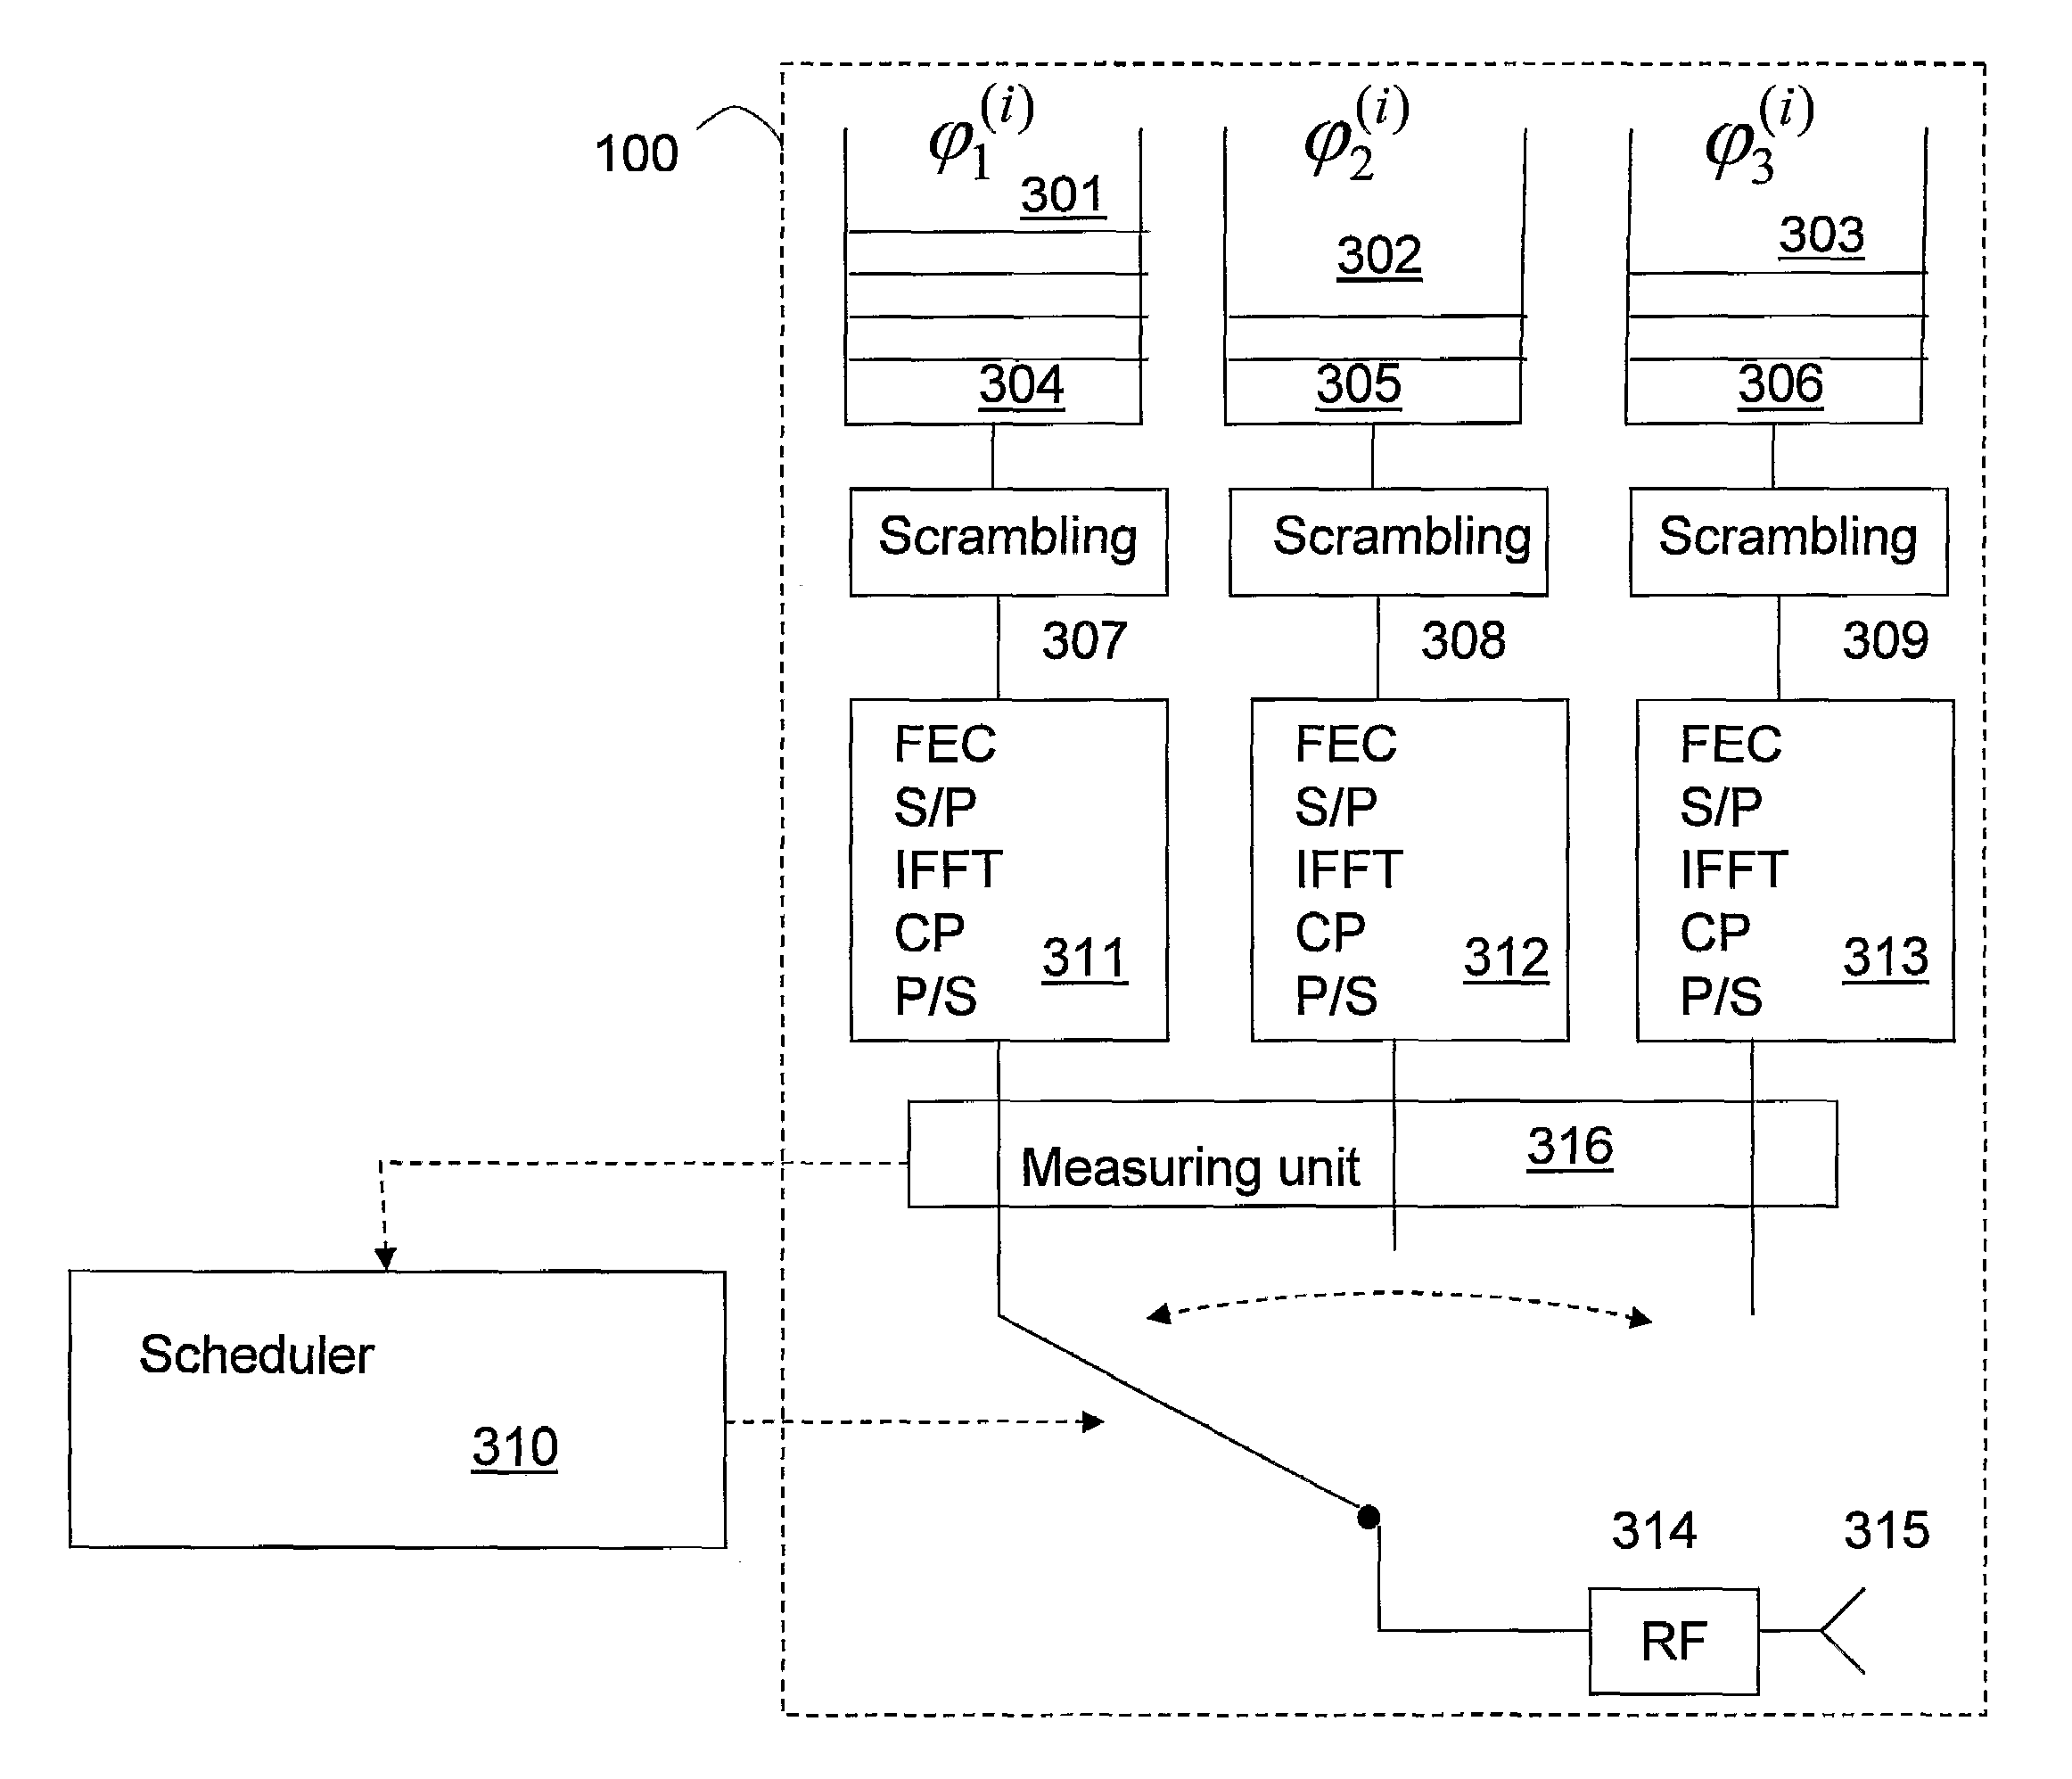 Transmitter apparatus and method for transmitting packet data units in a communication system